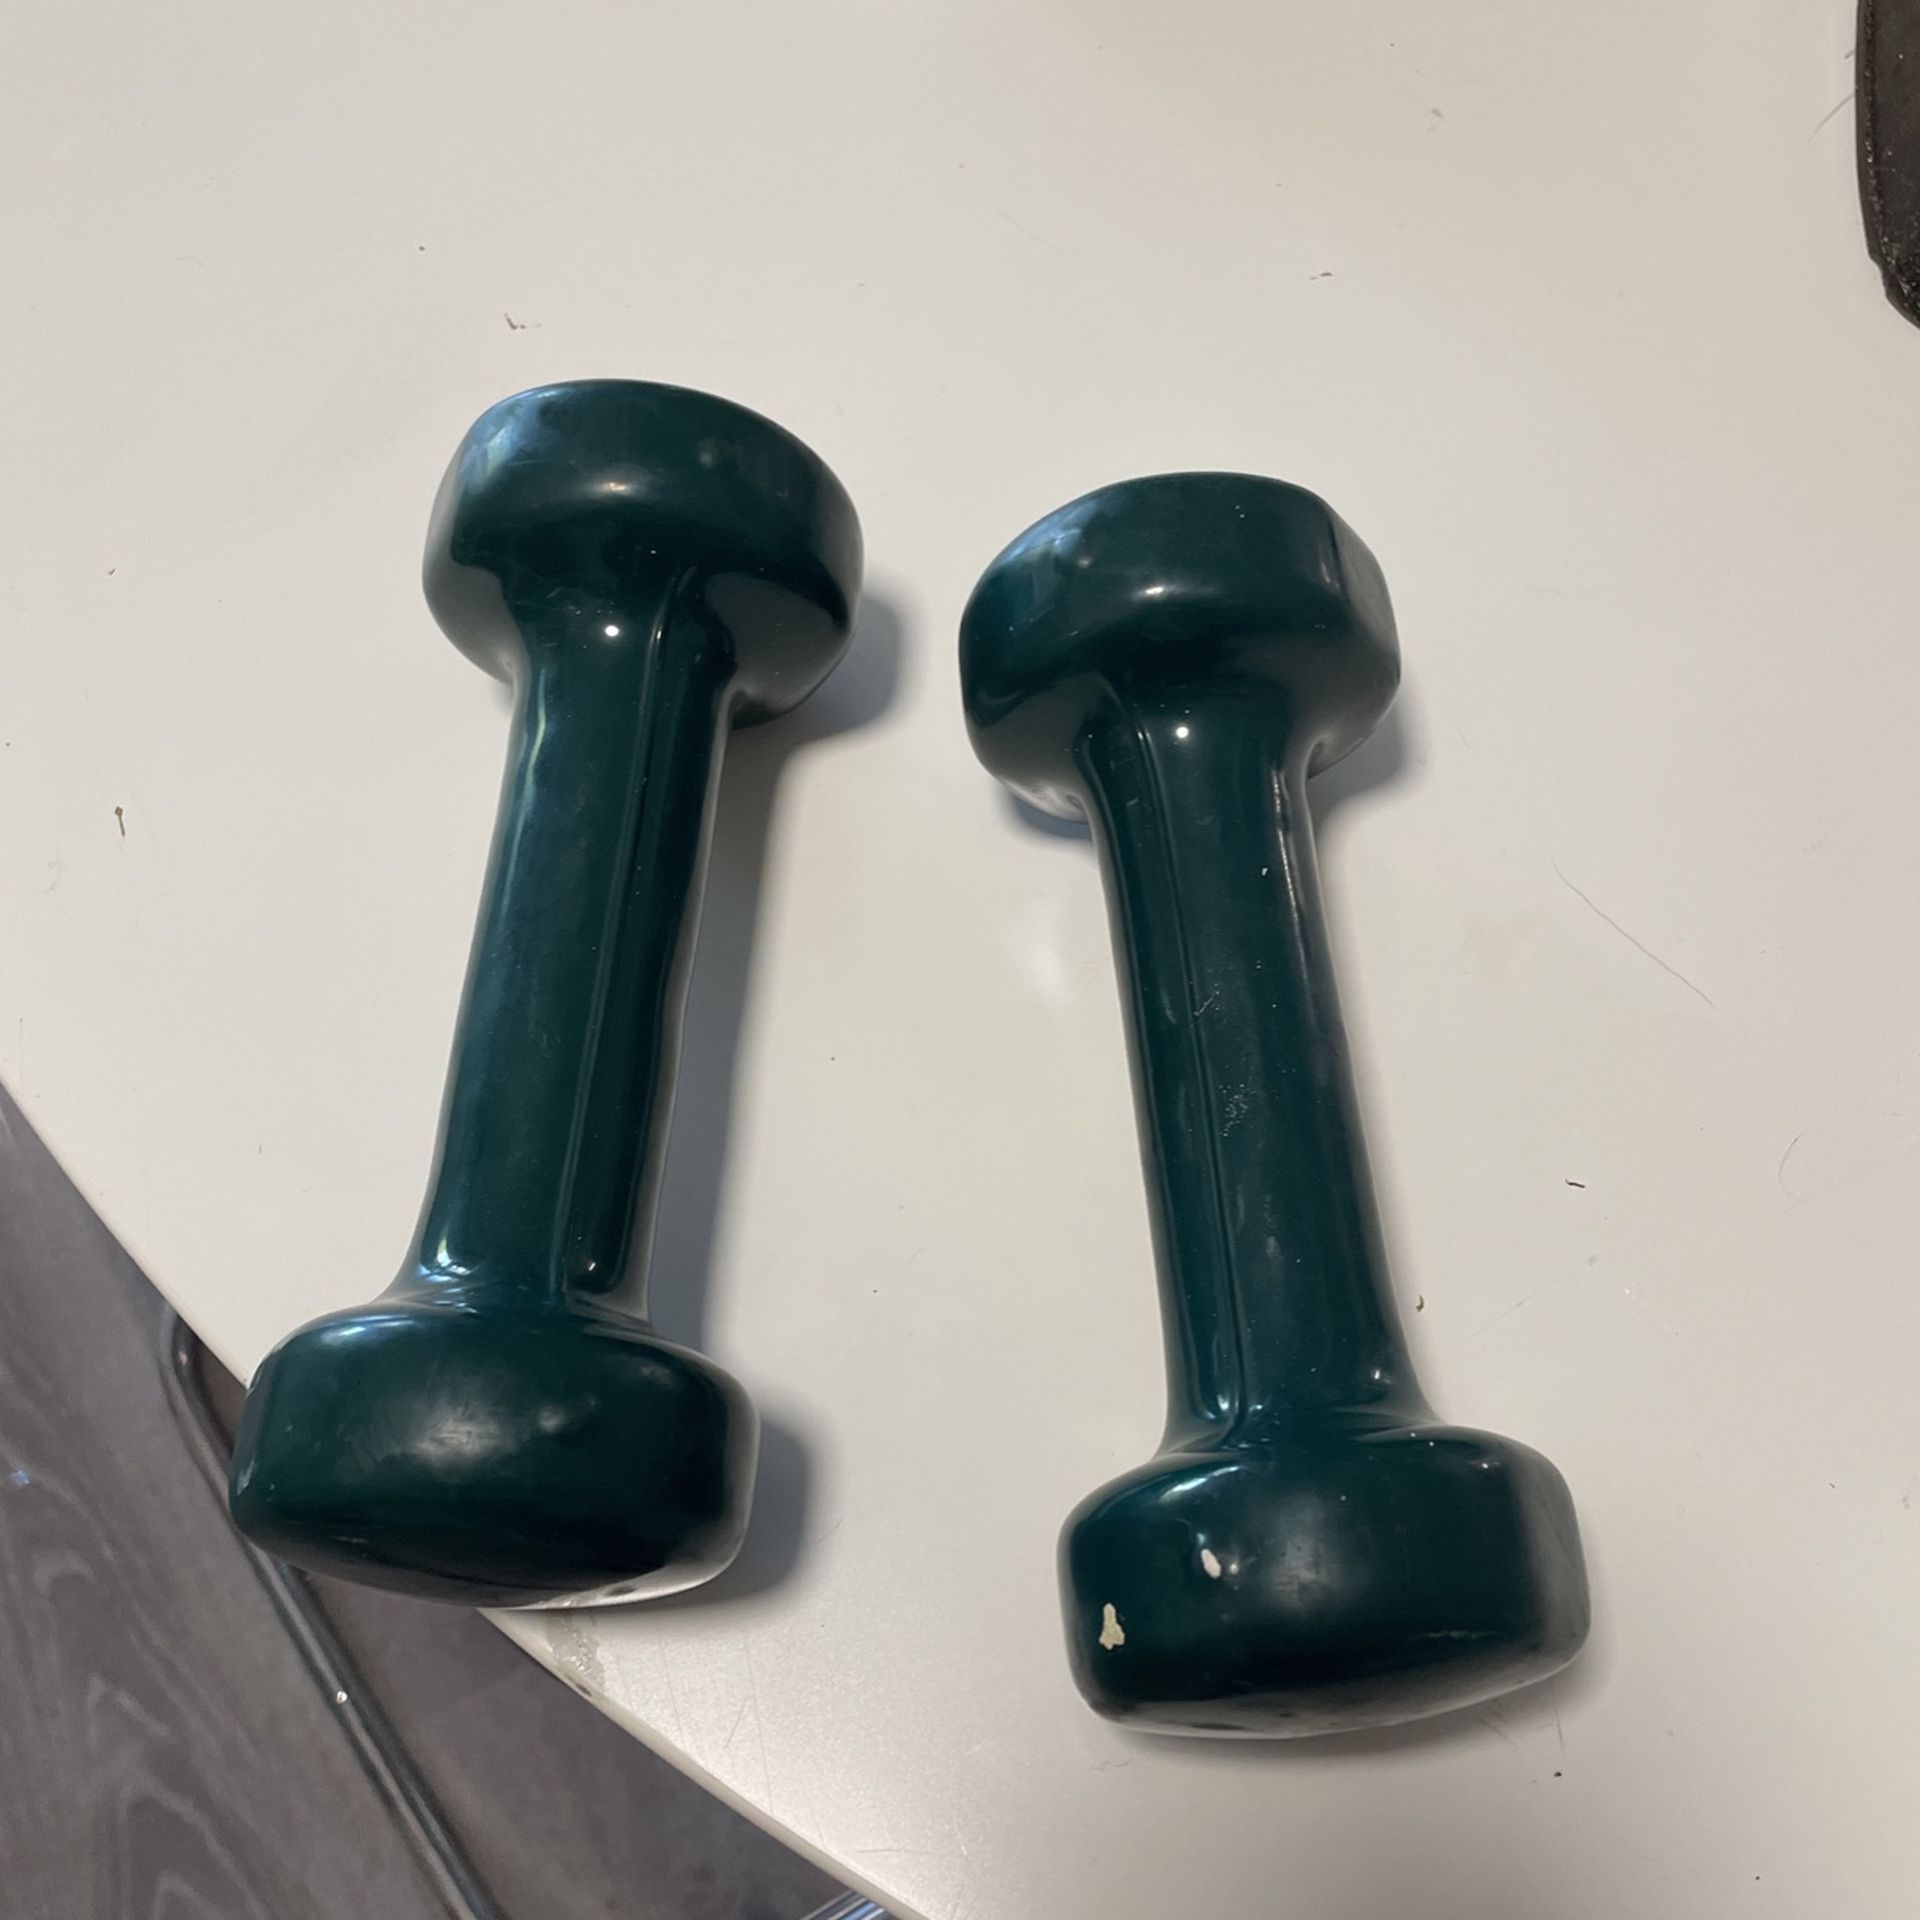 Used Green Hand Weights 